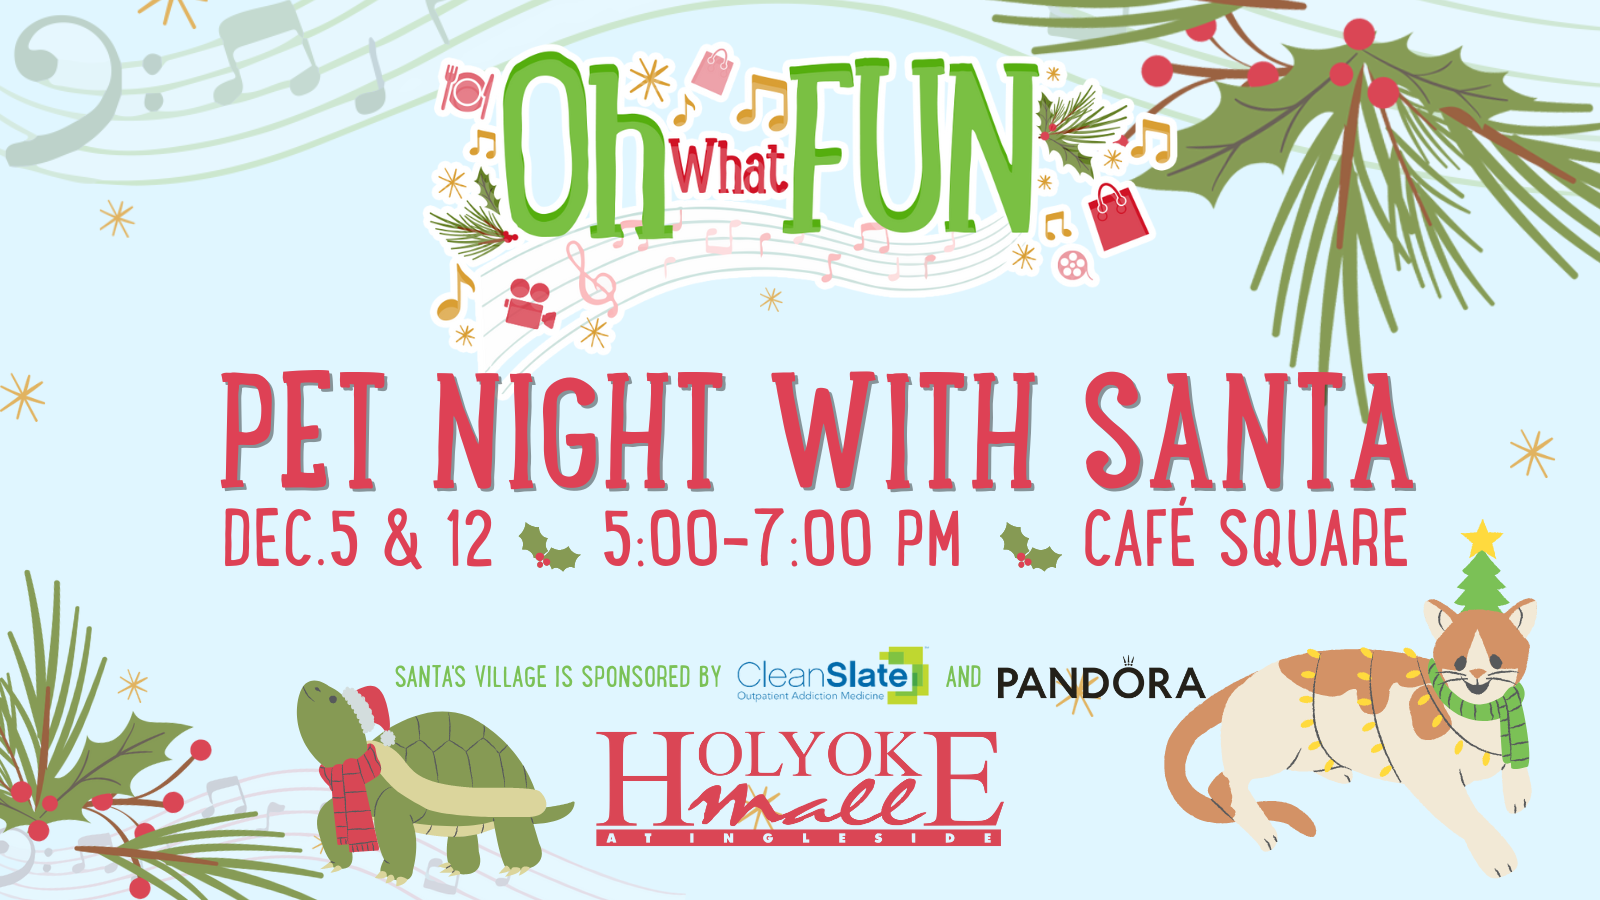 Pet Night with Santa on December 5 and 12 from 5-7PM in Café Square